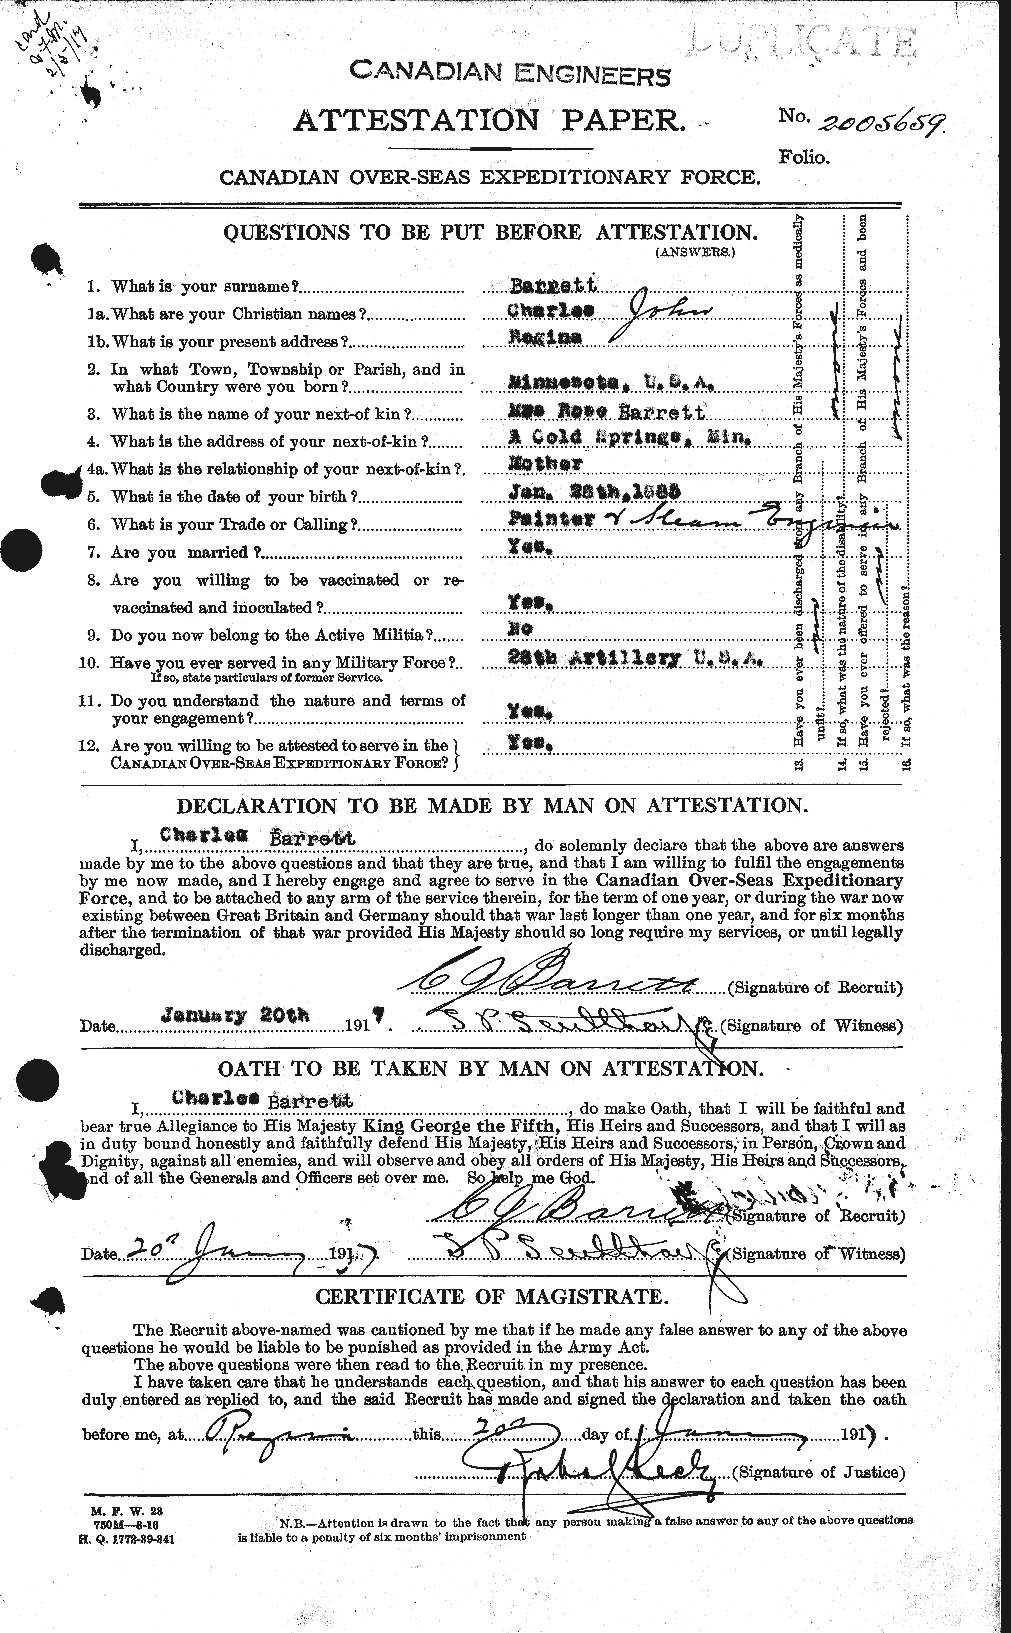 Personnel Records of the First World War - CEF 222225a